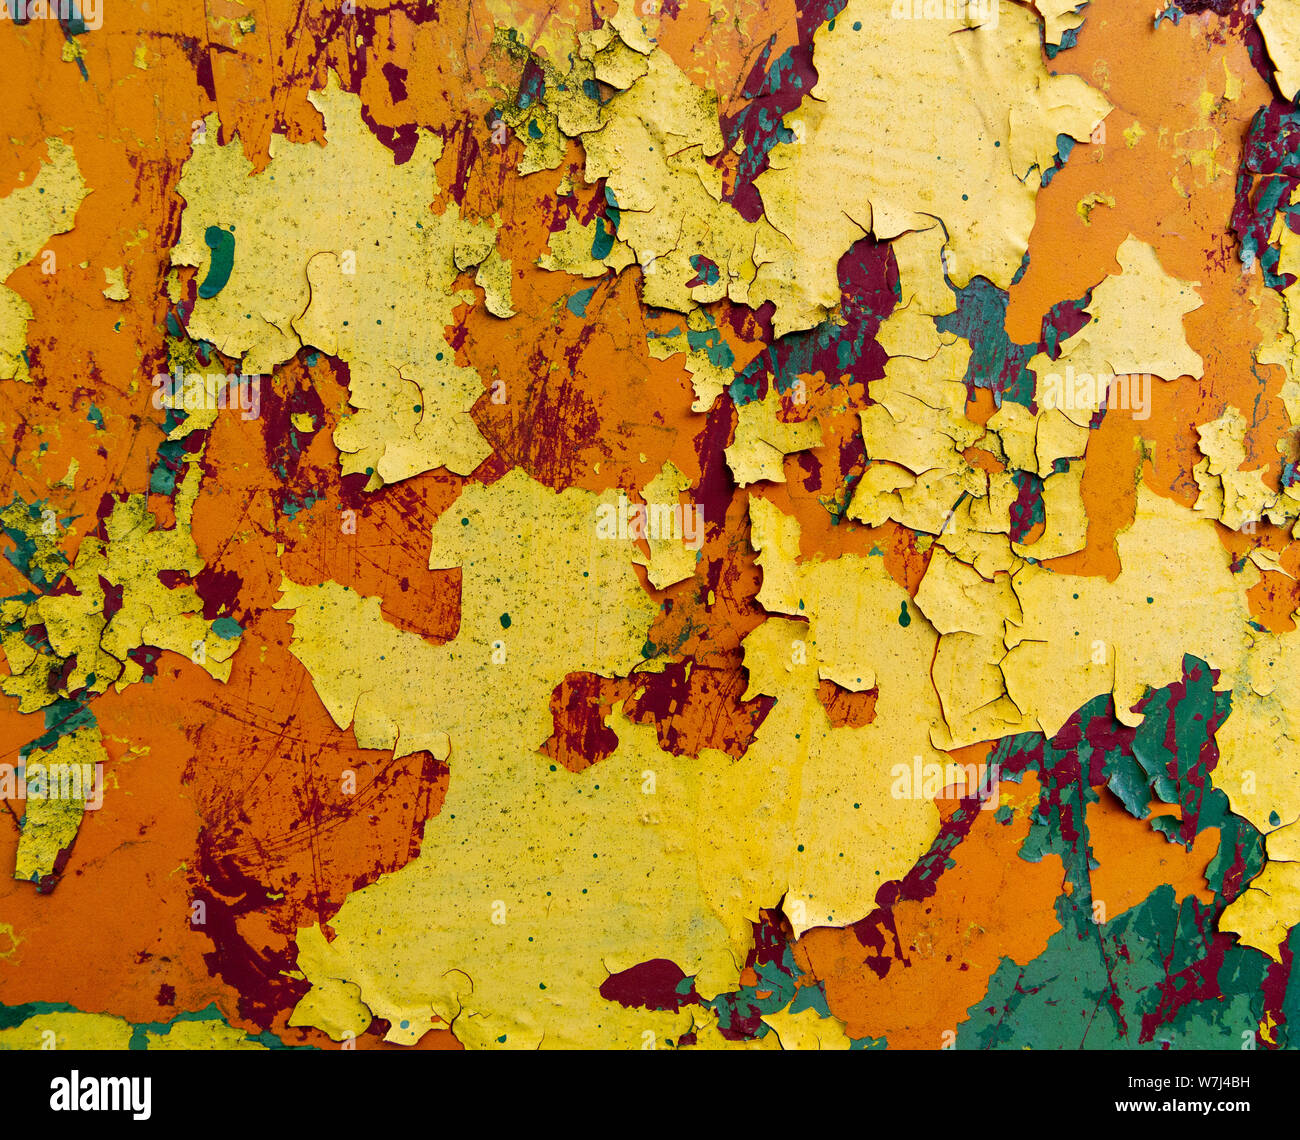 rusty metal sheet with peeling layers of paint of different colours - a surface texture photo Stock Photo